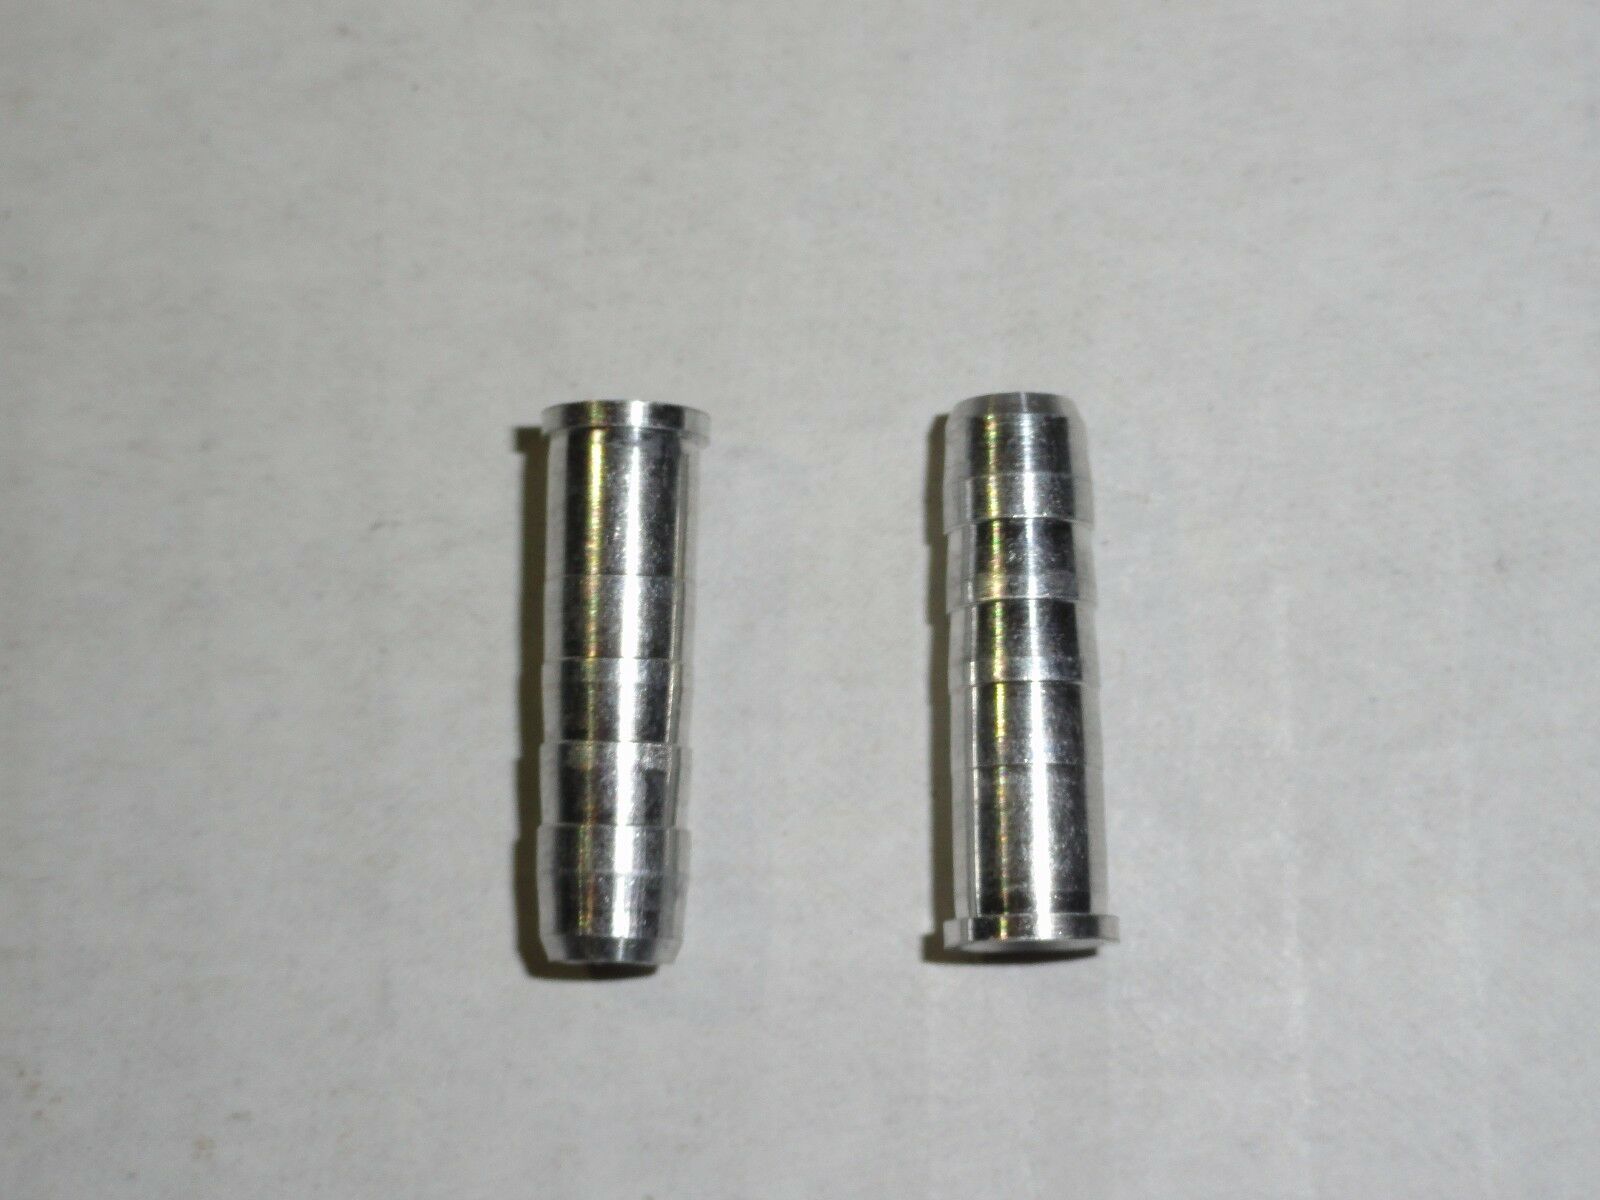 Aluminum Inserts For Arrows. 1716, 1816, 1916, 2016, 2018, 2117, 2216, Or 2219